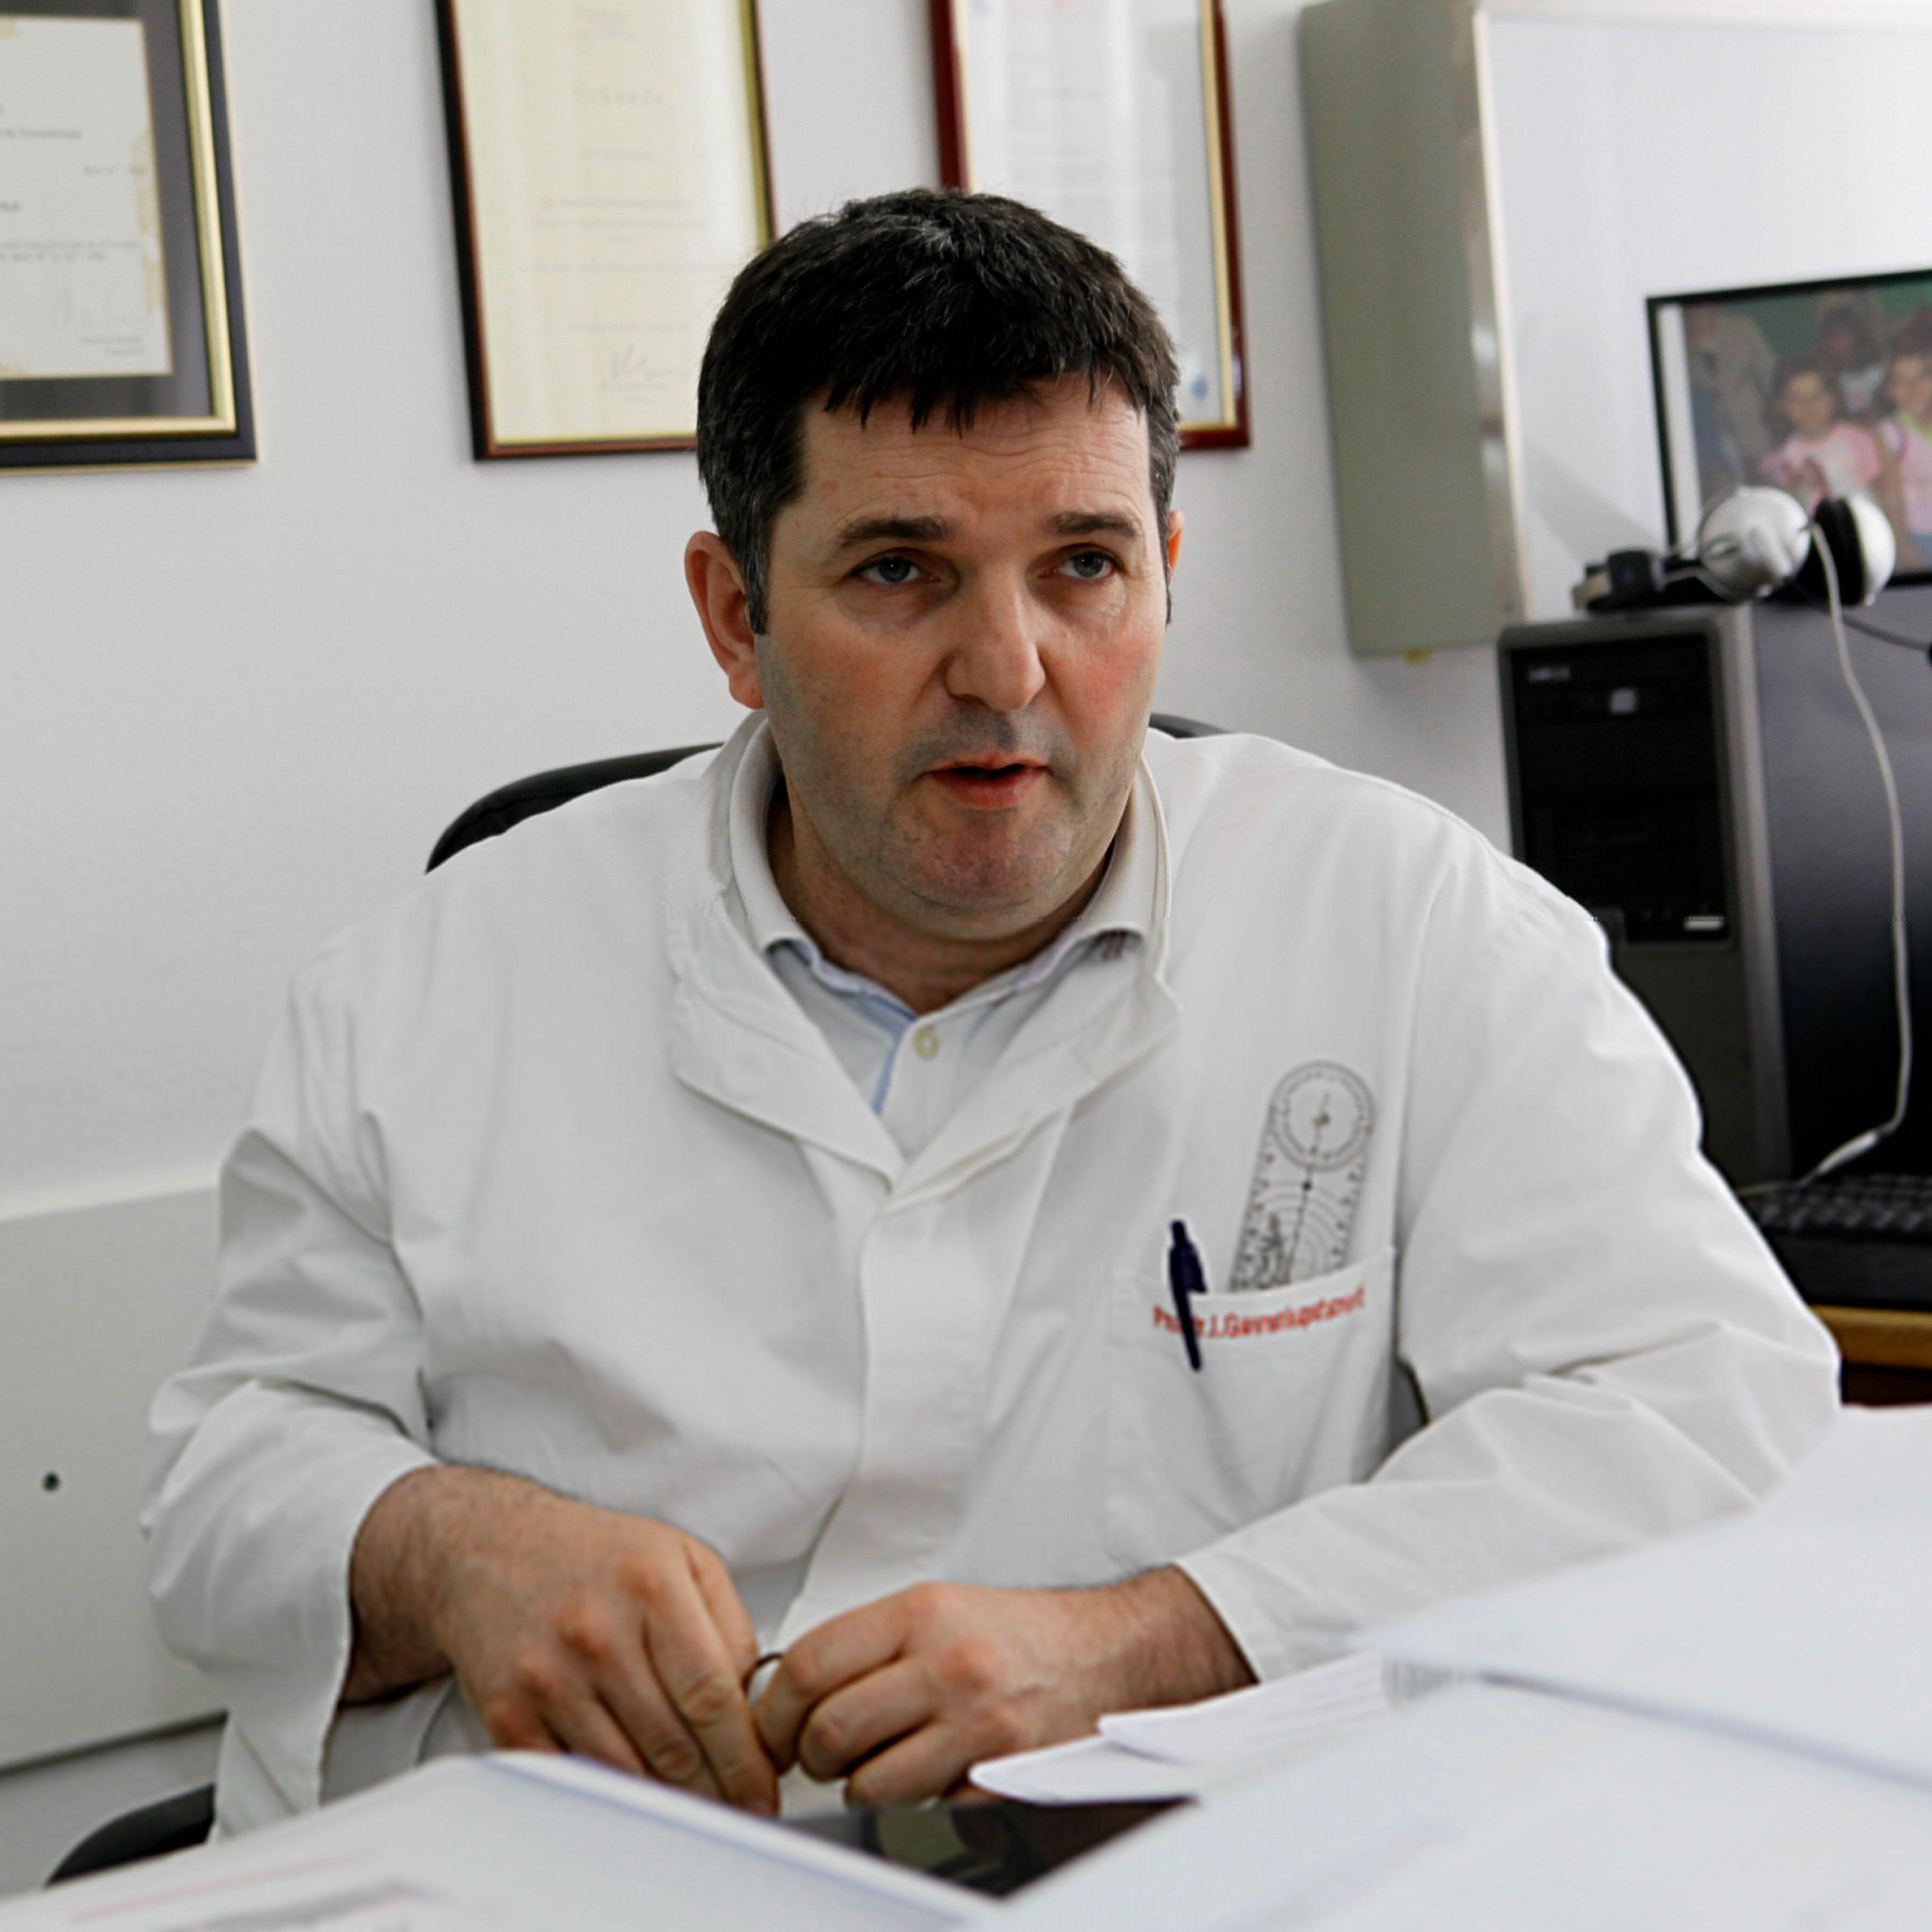 Prof. dr. Gavrankapetanović for "Avaz": We are always ready to help people in need